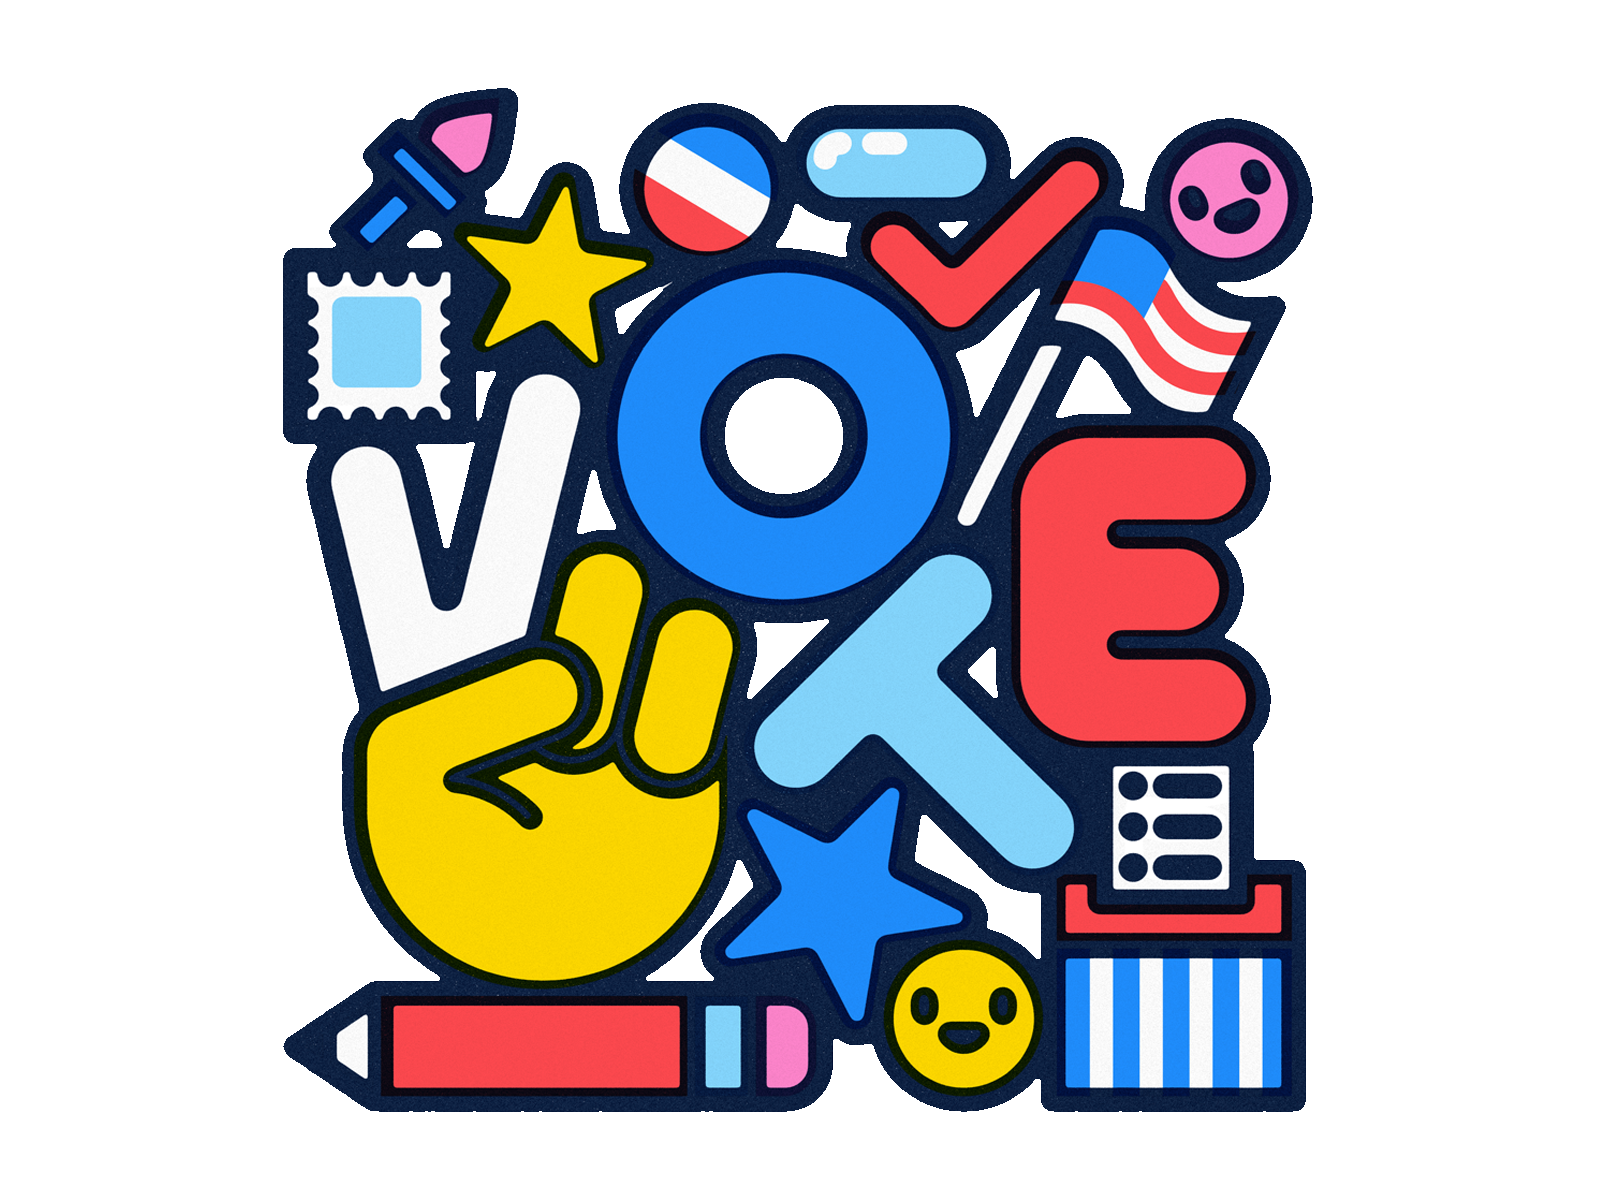 Graphic of the word "vote."